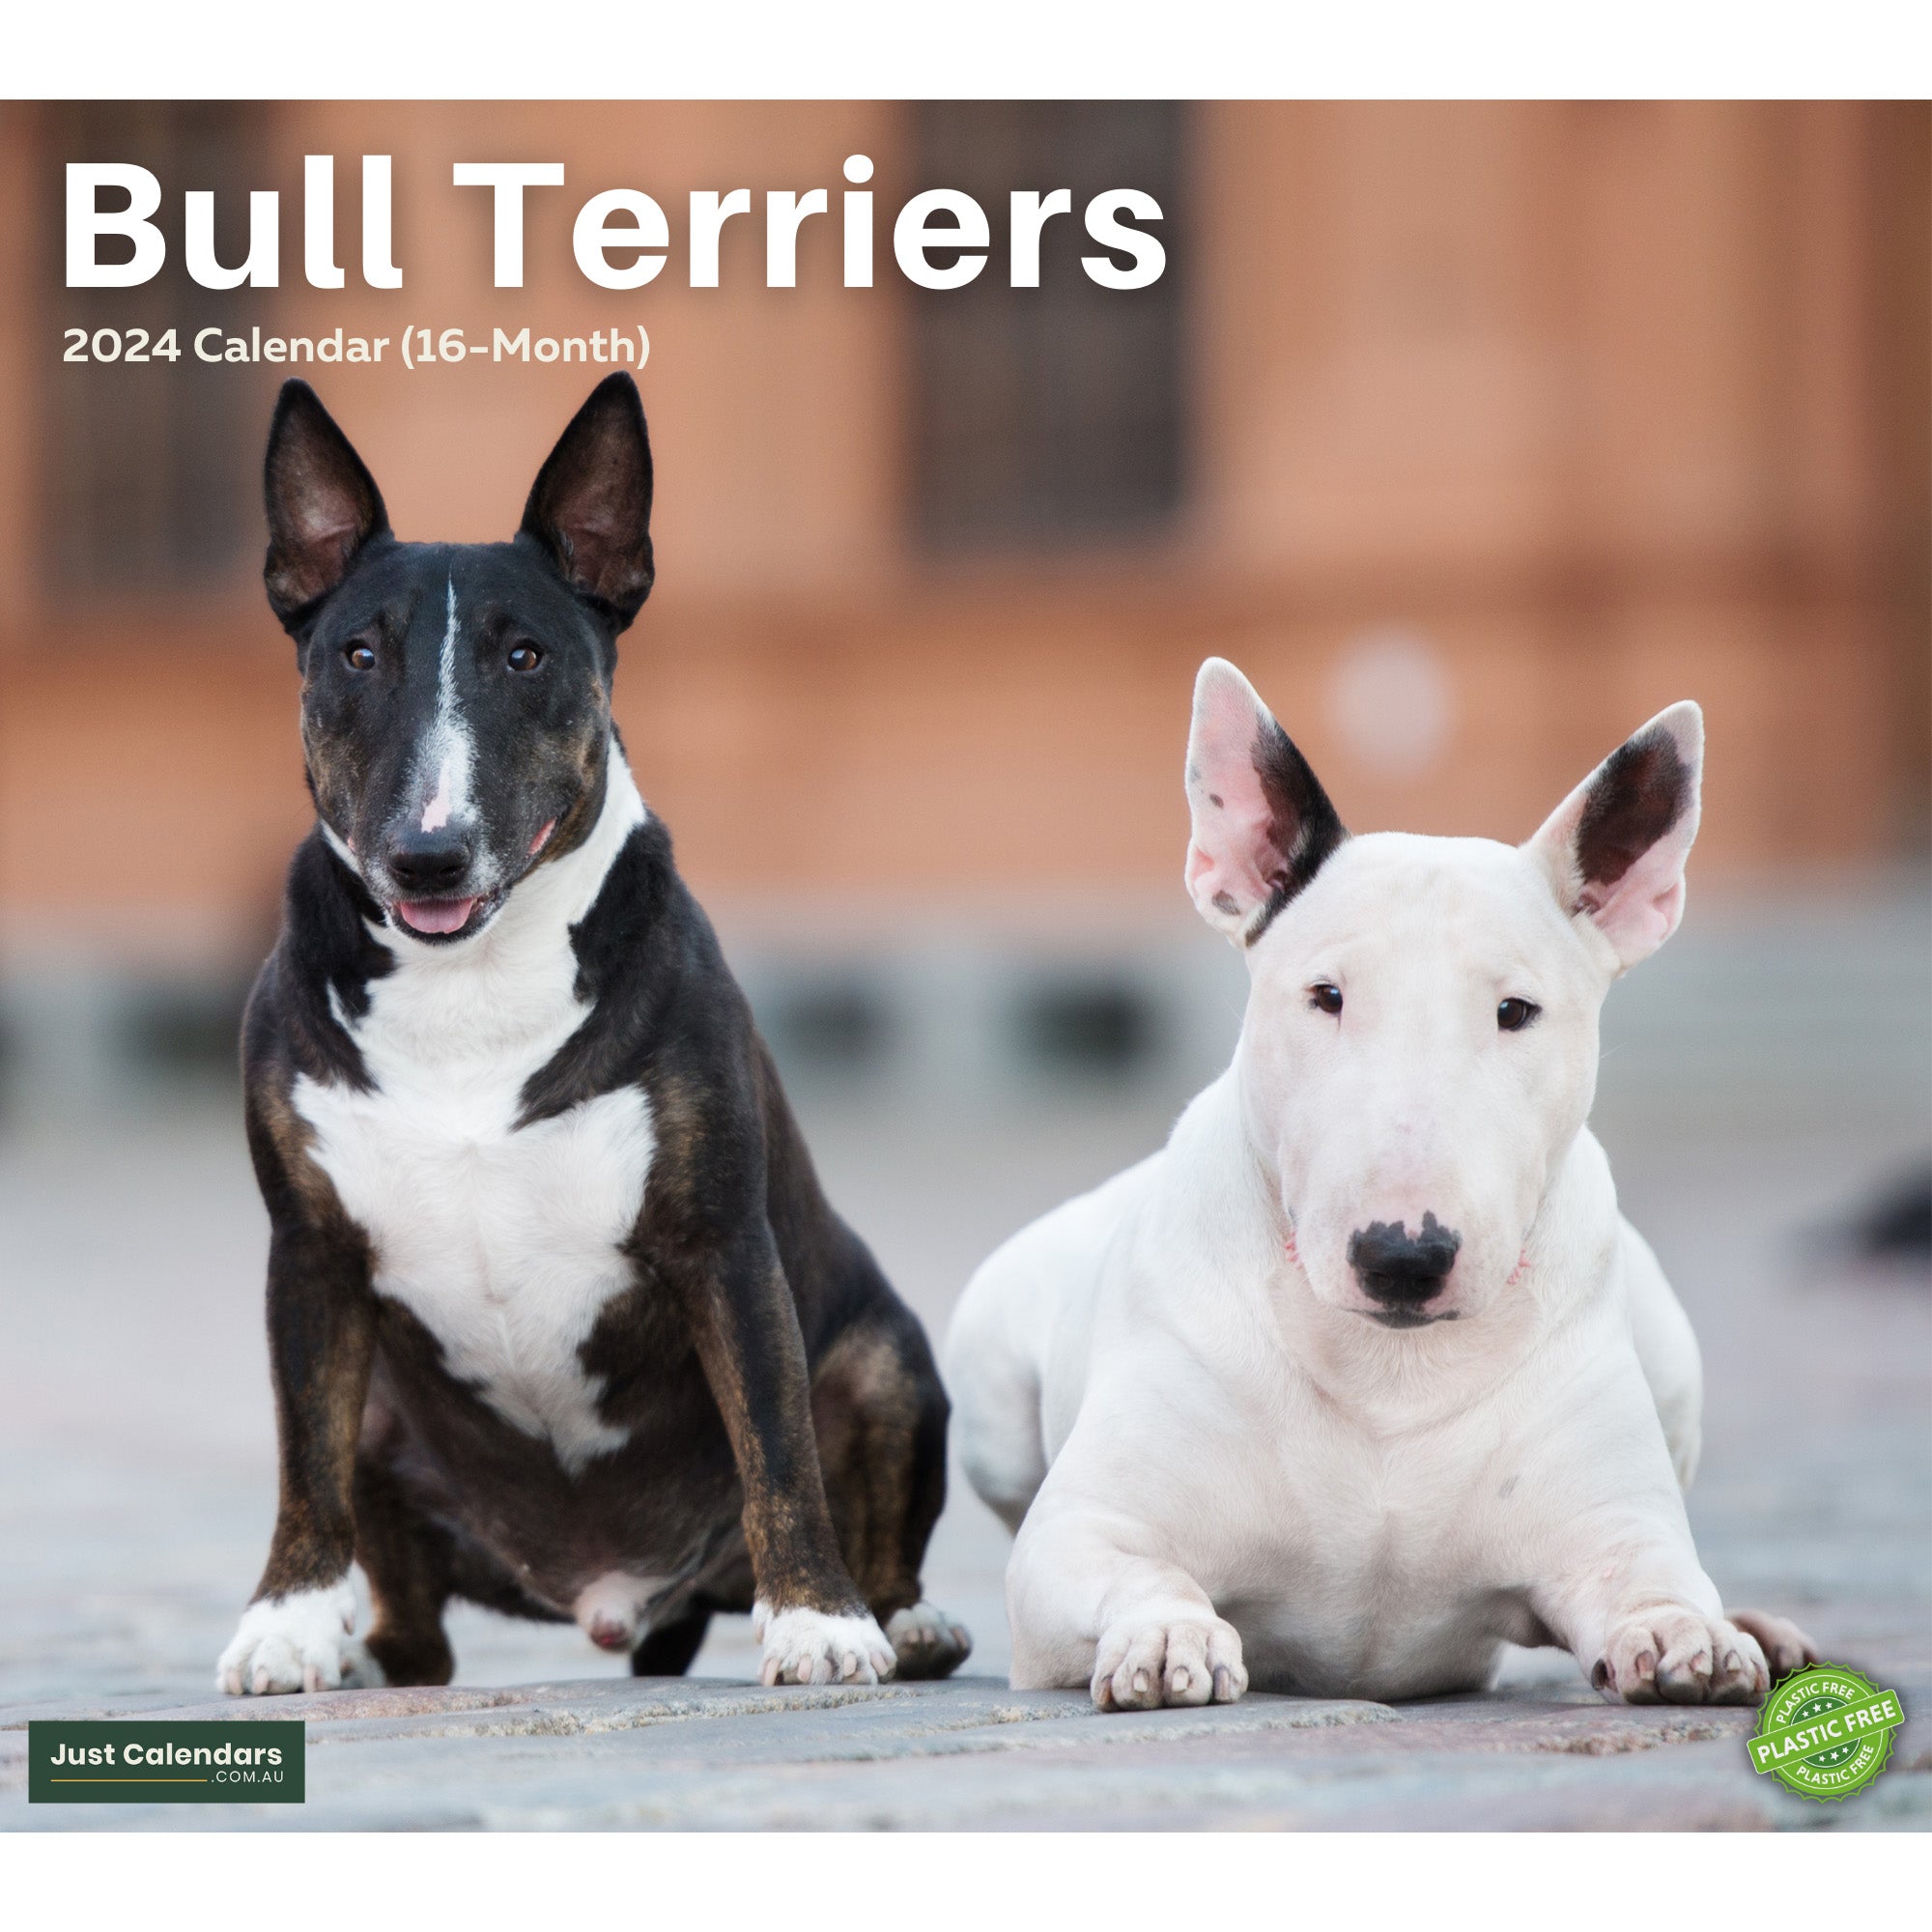 2024 Bull Terriers Dogs & Puppies - Deluxe Wall Calendar by Just Calendars - 16 Month - Plastic Free